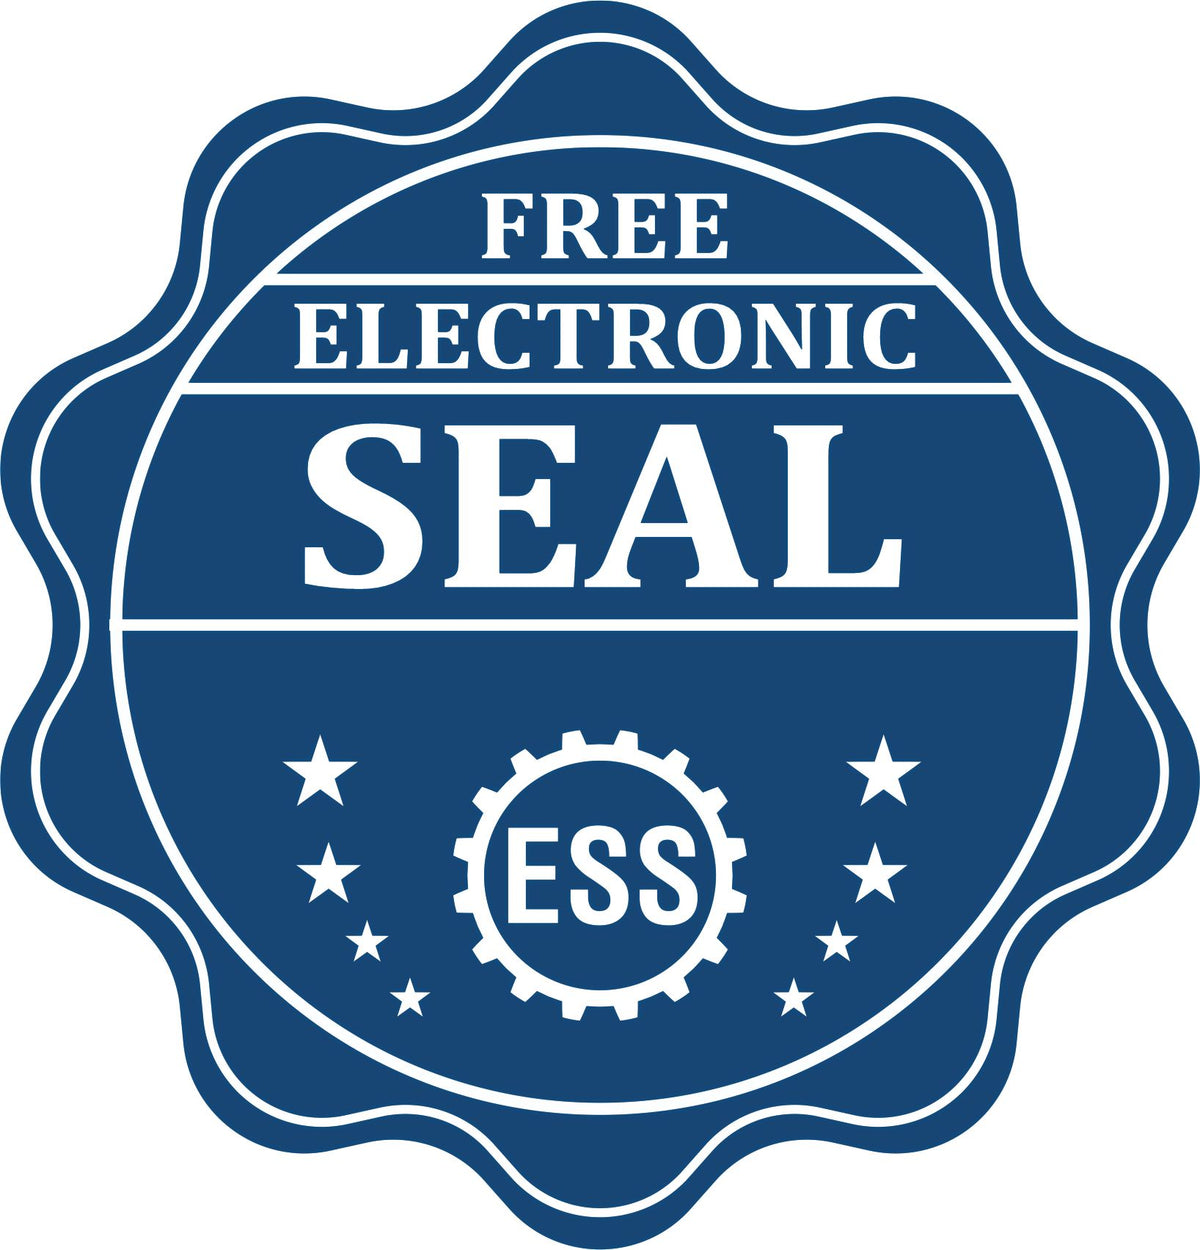 A badge showing a free electronic seal for the Gift Missouri Landscape Architect Seal with stars and the ESS gear on the emblem.